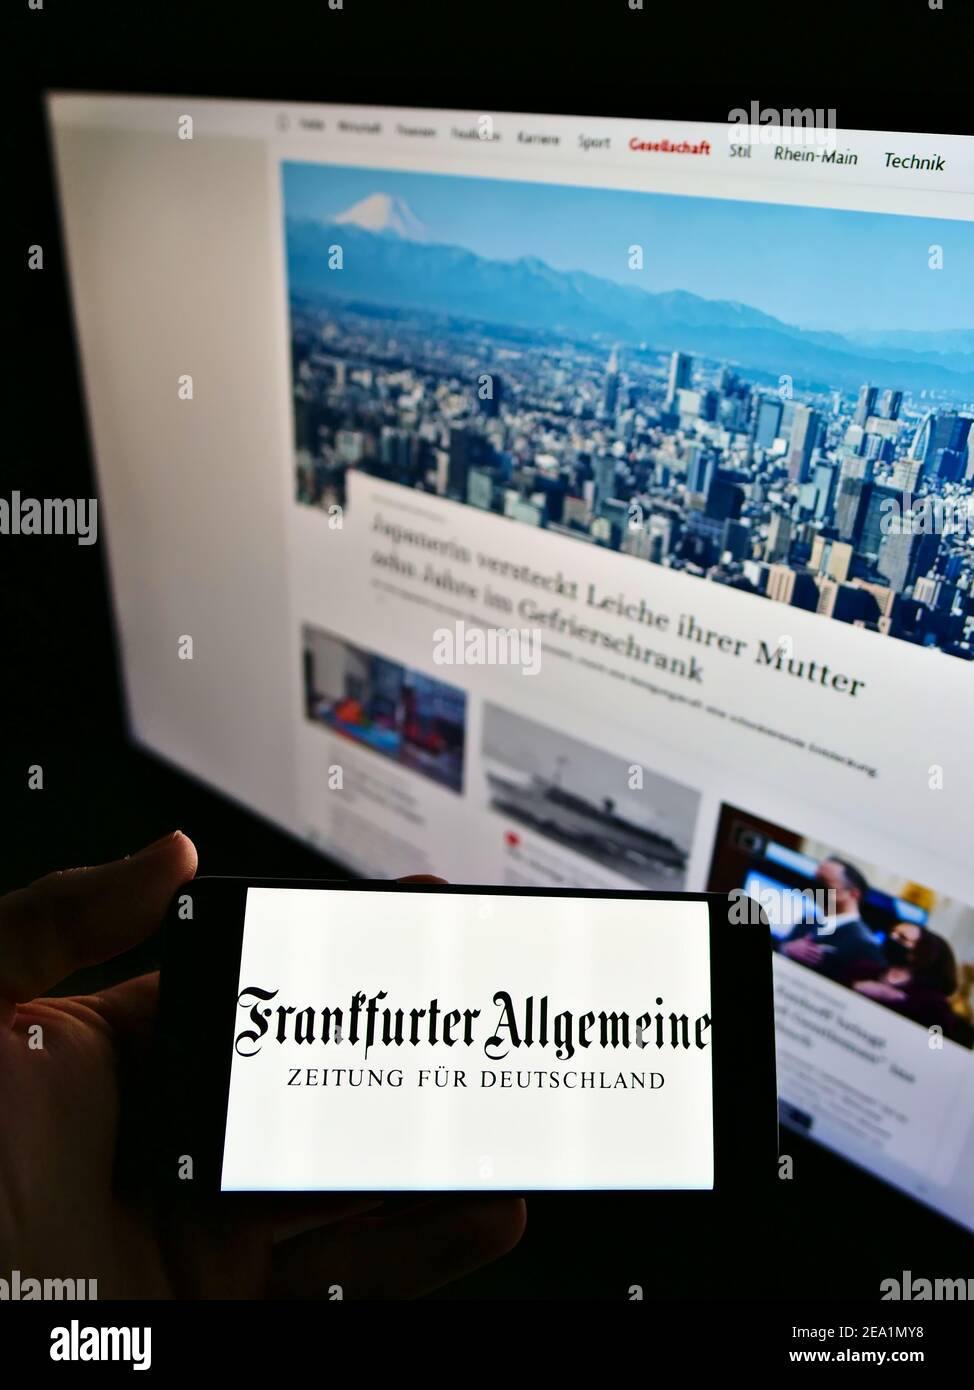 Person holding mobile phone with logo of German newspaper Frankfurter Allgemeine Zeitung (FAZ) on screen with website. Focus on cellphone display. Stock Photo